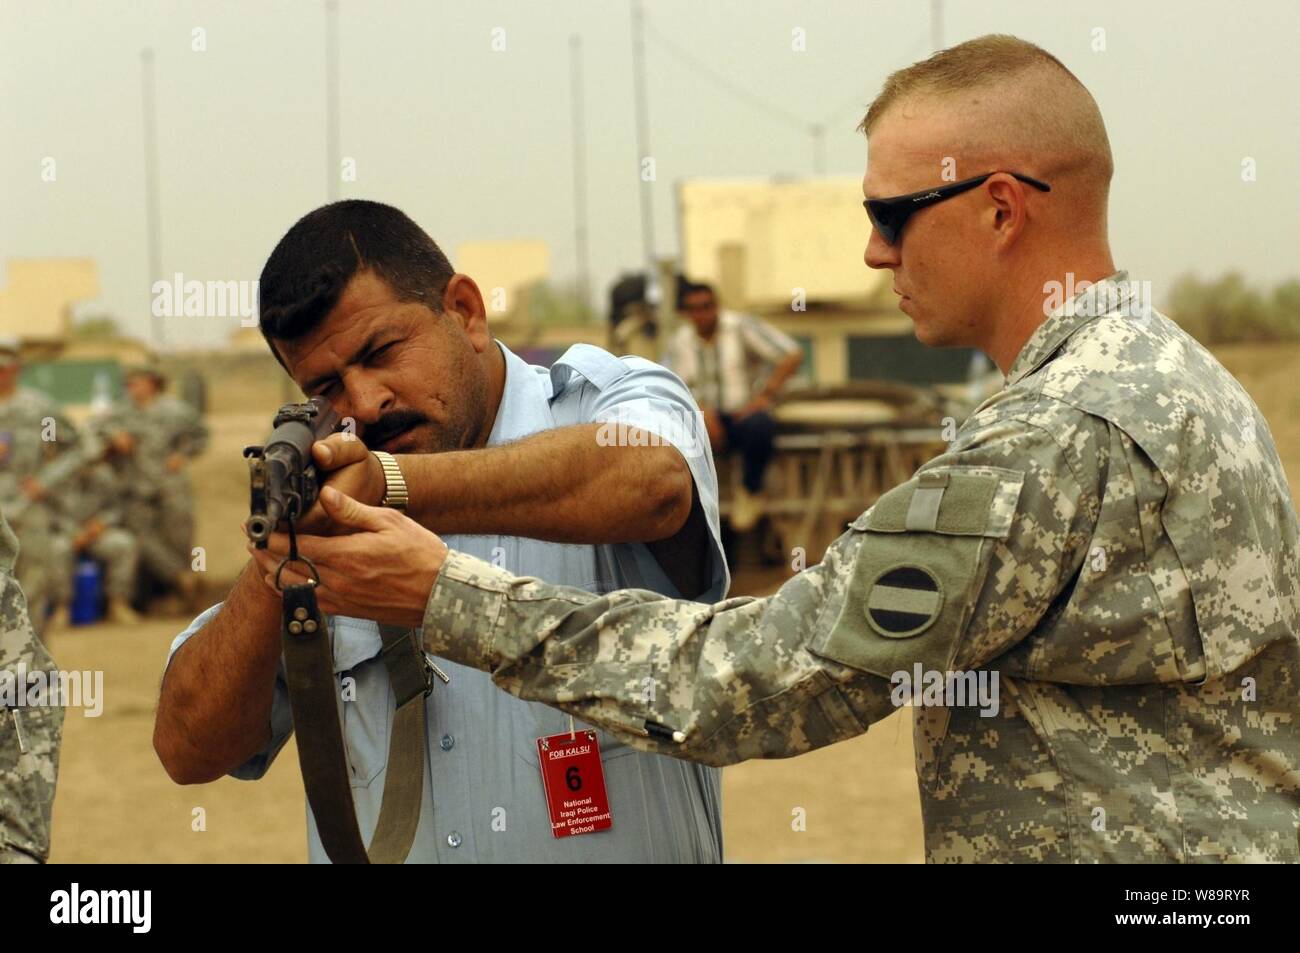 A soldier from the U.S. Armyís 988th Military Police Company trains an Iraqi police officer on how to properly hold a weapon during a two-week basic military training course at Forward Operating Base Kalsu, Iraq, on May 2, 2006. Stock Photo